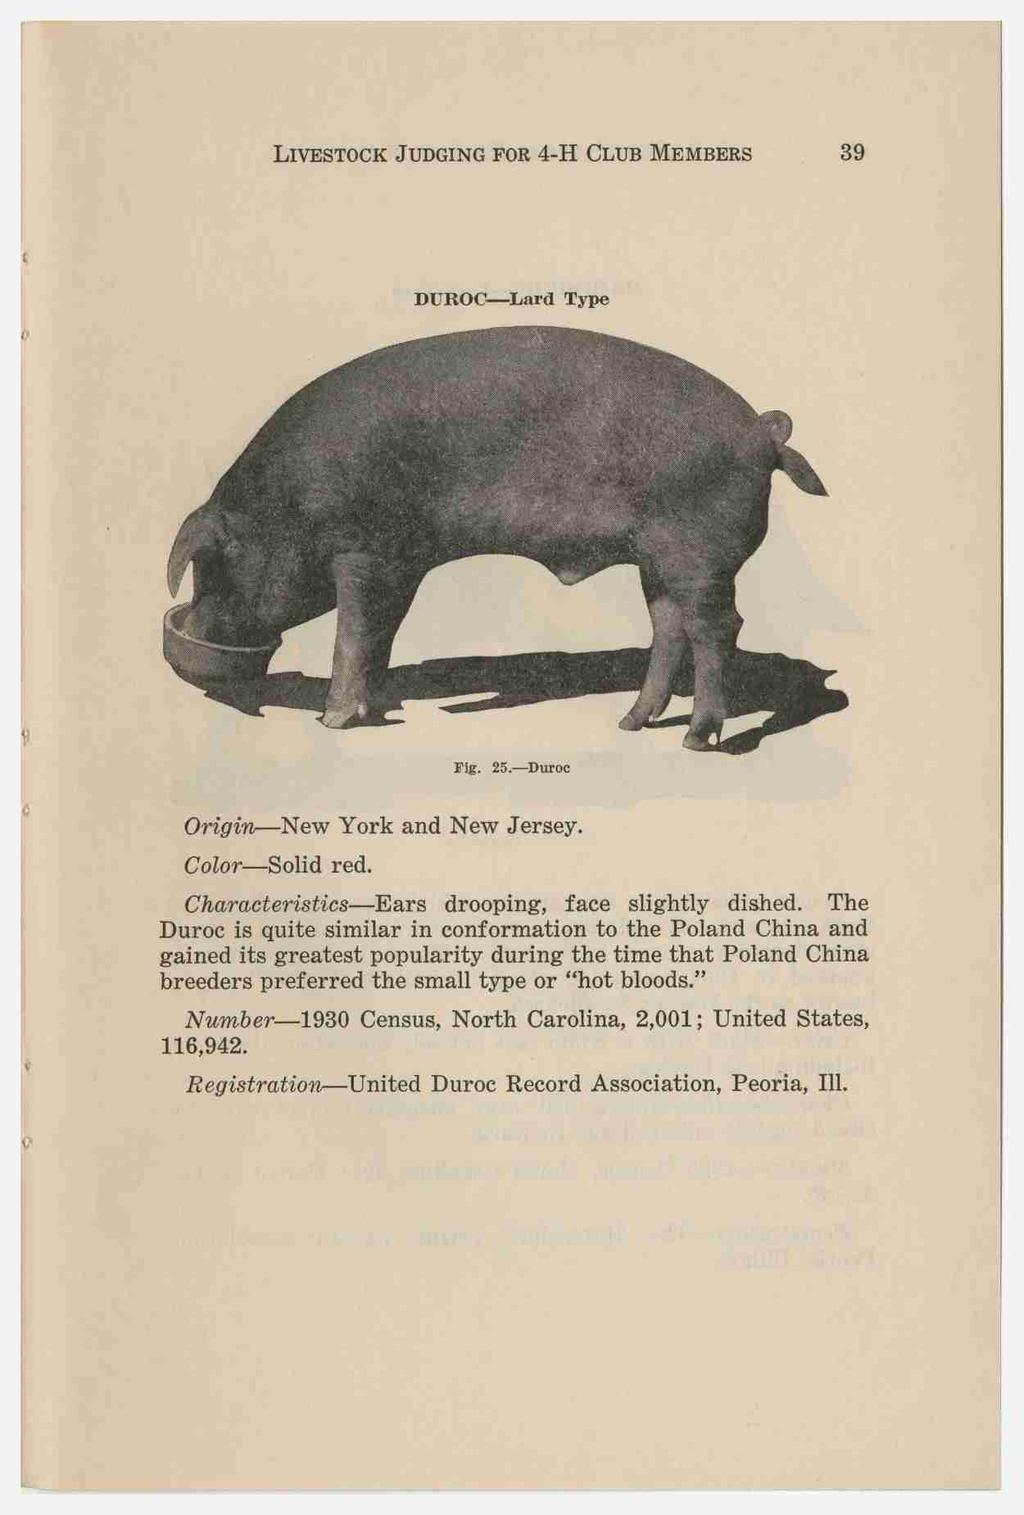 LIVESTOCK J UDGING FOR 4-H CLUB MEMBERS, 39 DUROC Lard Type Fig. 25. Duroc Origin New York and New Jersey. Color Solid red. Characteristics Ears drooping, face slightly dished.